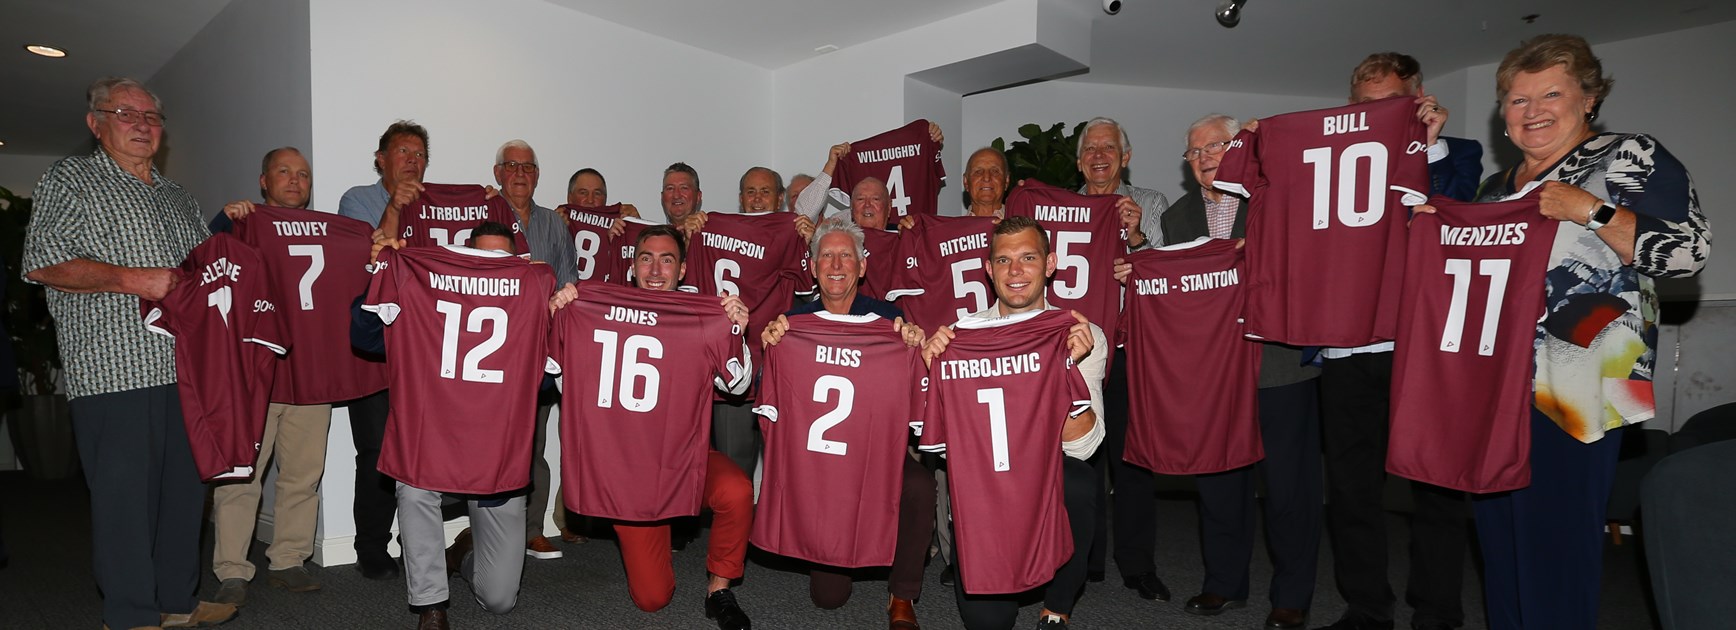 Legends...players and family representatives of the 90th Anniversary team with their commemorative jerseys.